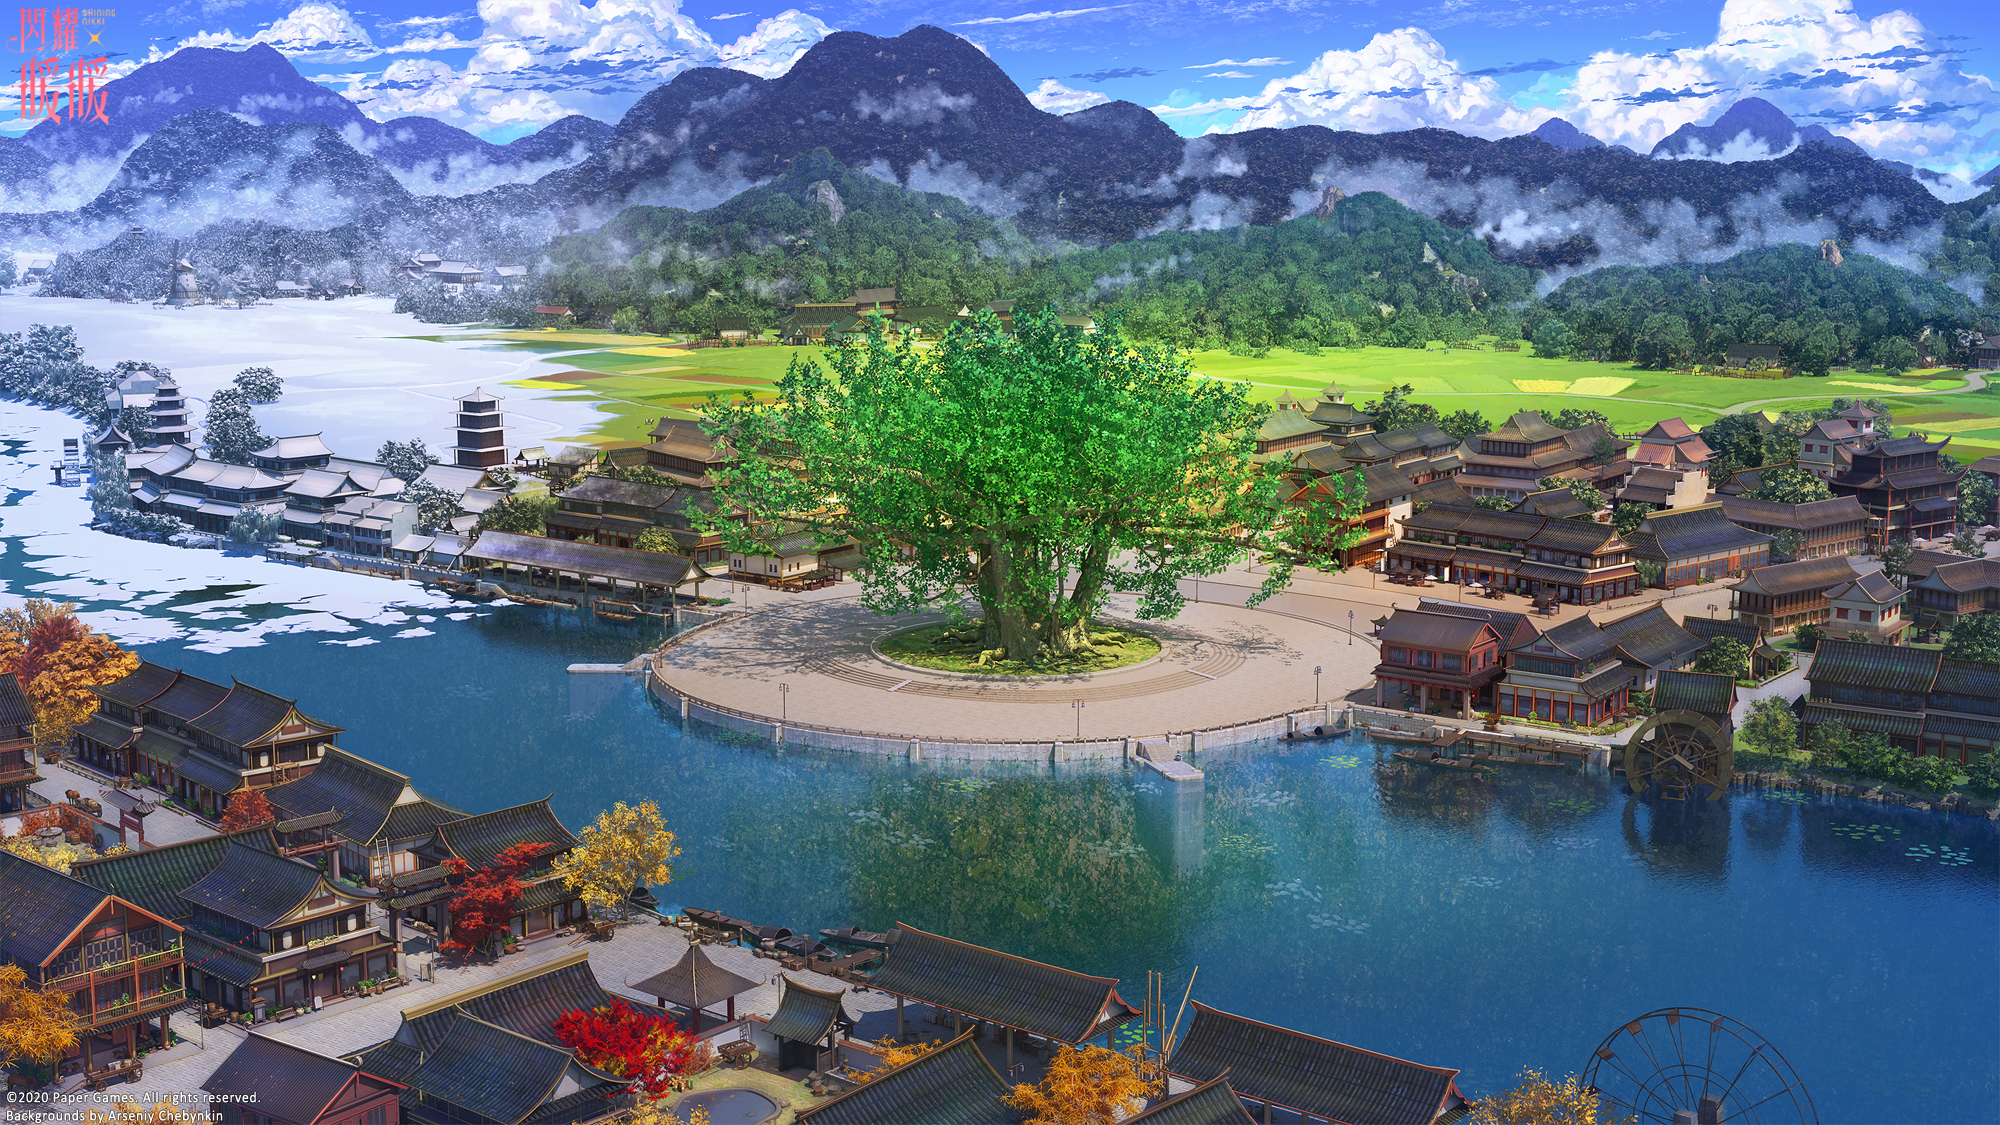 Giant tree at the center of a small Japanese village by ArseniXC